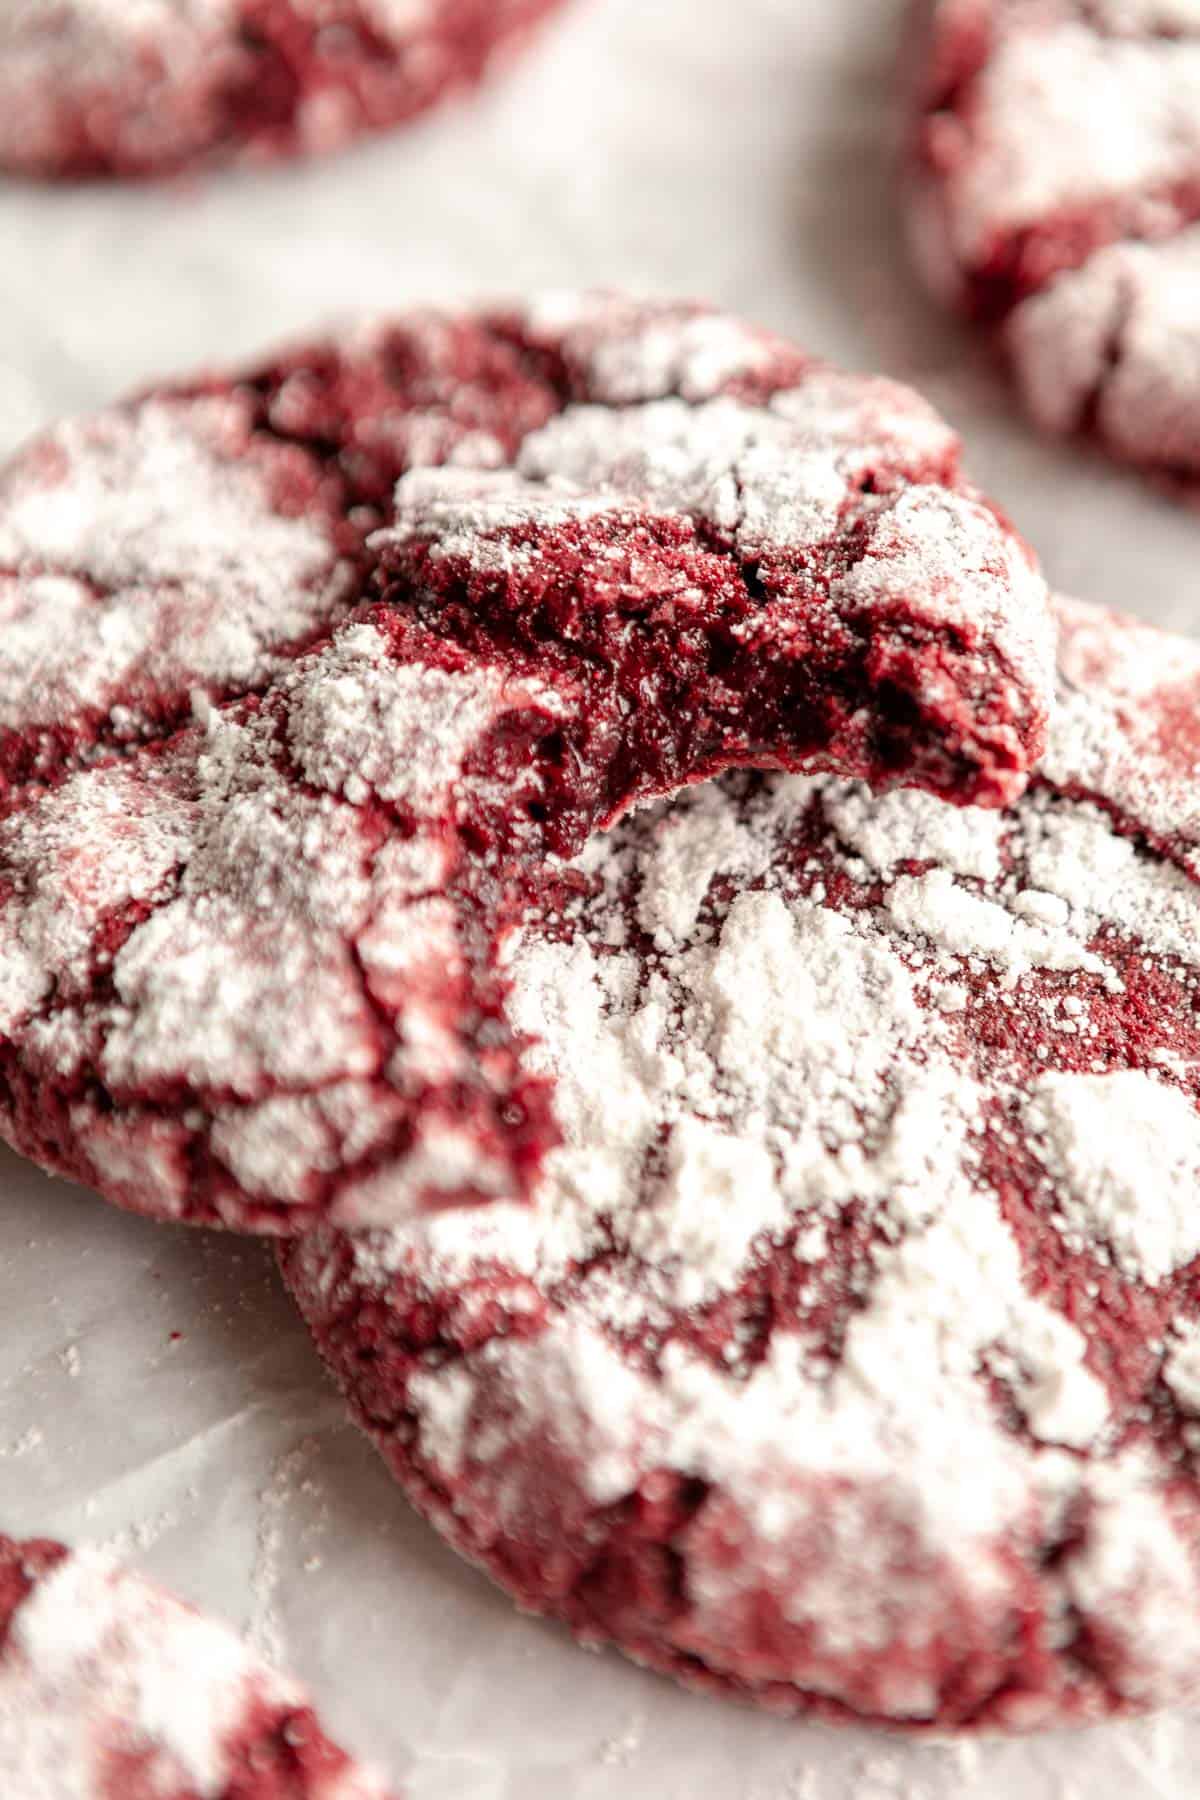 one bite taken out of the gluten free red velvet crinkle cookie to show fudgy texture